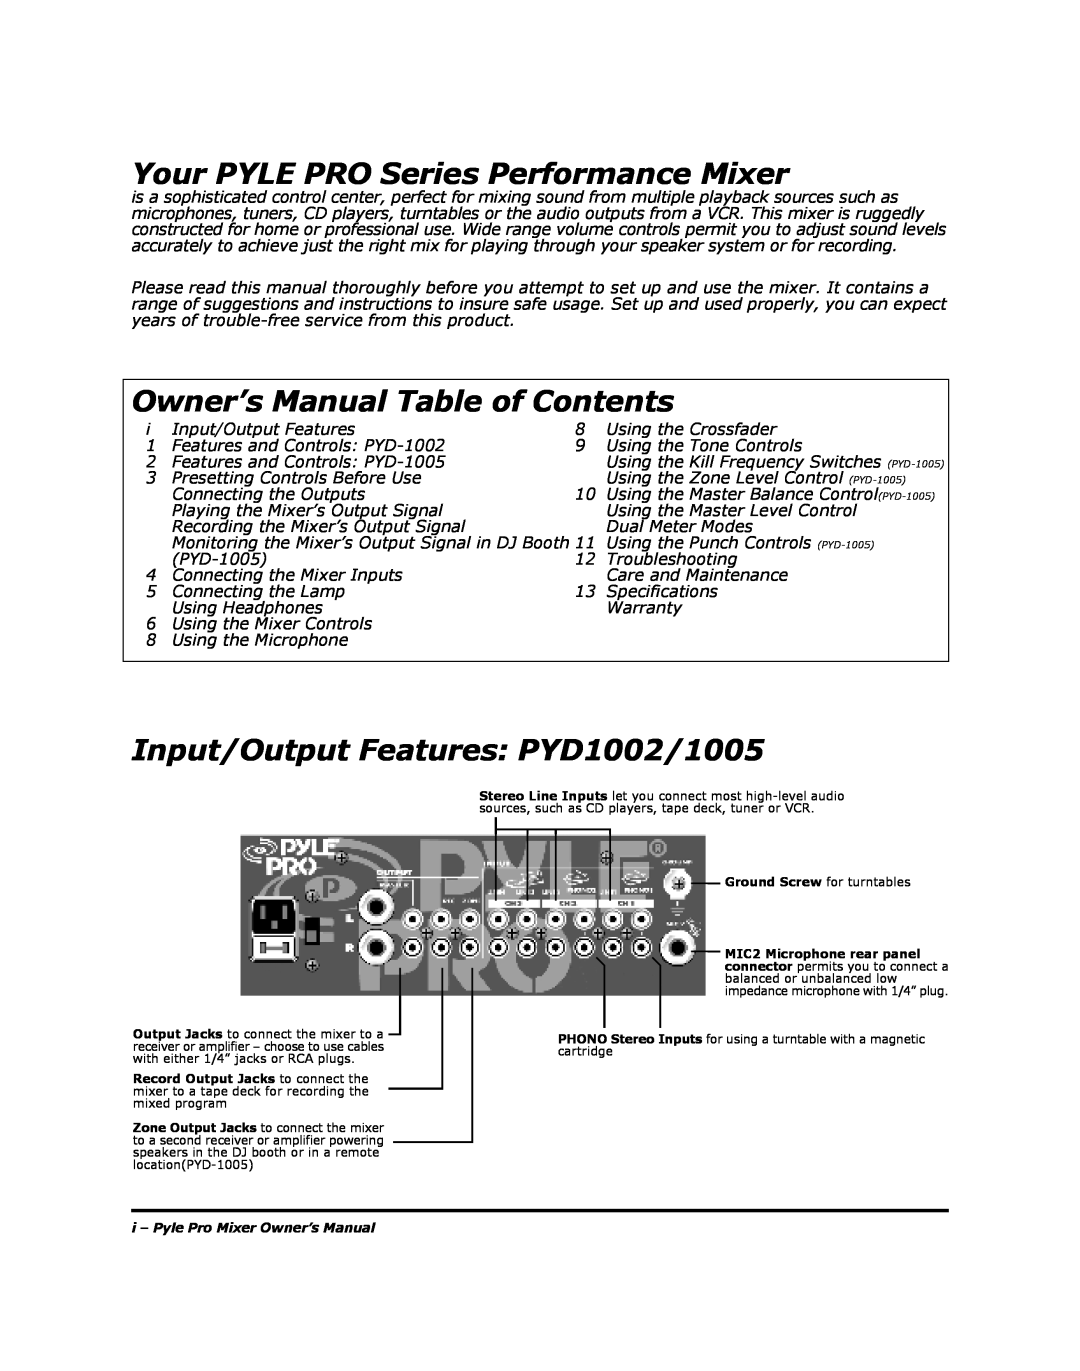 PYLE Audio PYD-1002, PYD-1005 manual Your PYLE PRO Series Performance Mixer, Owner’s Manual Table of Contents 